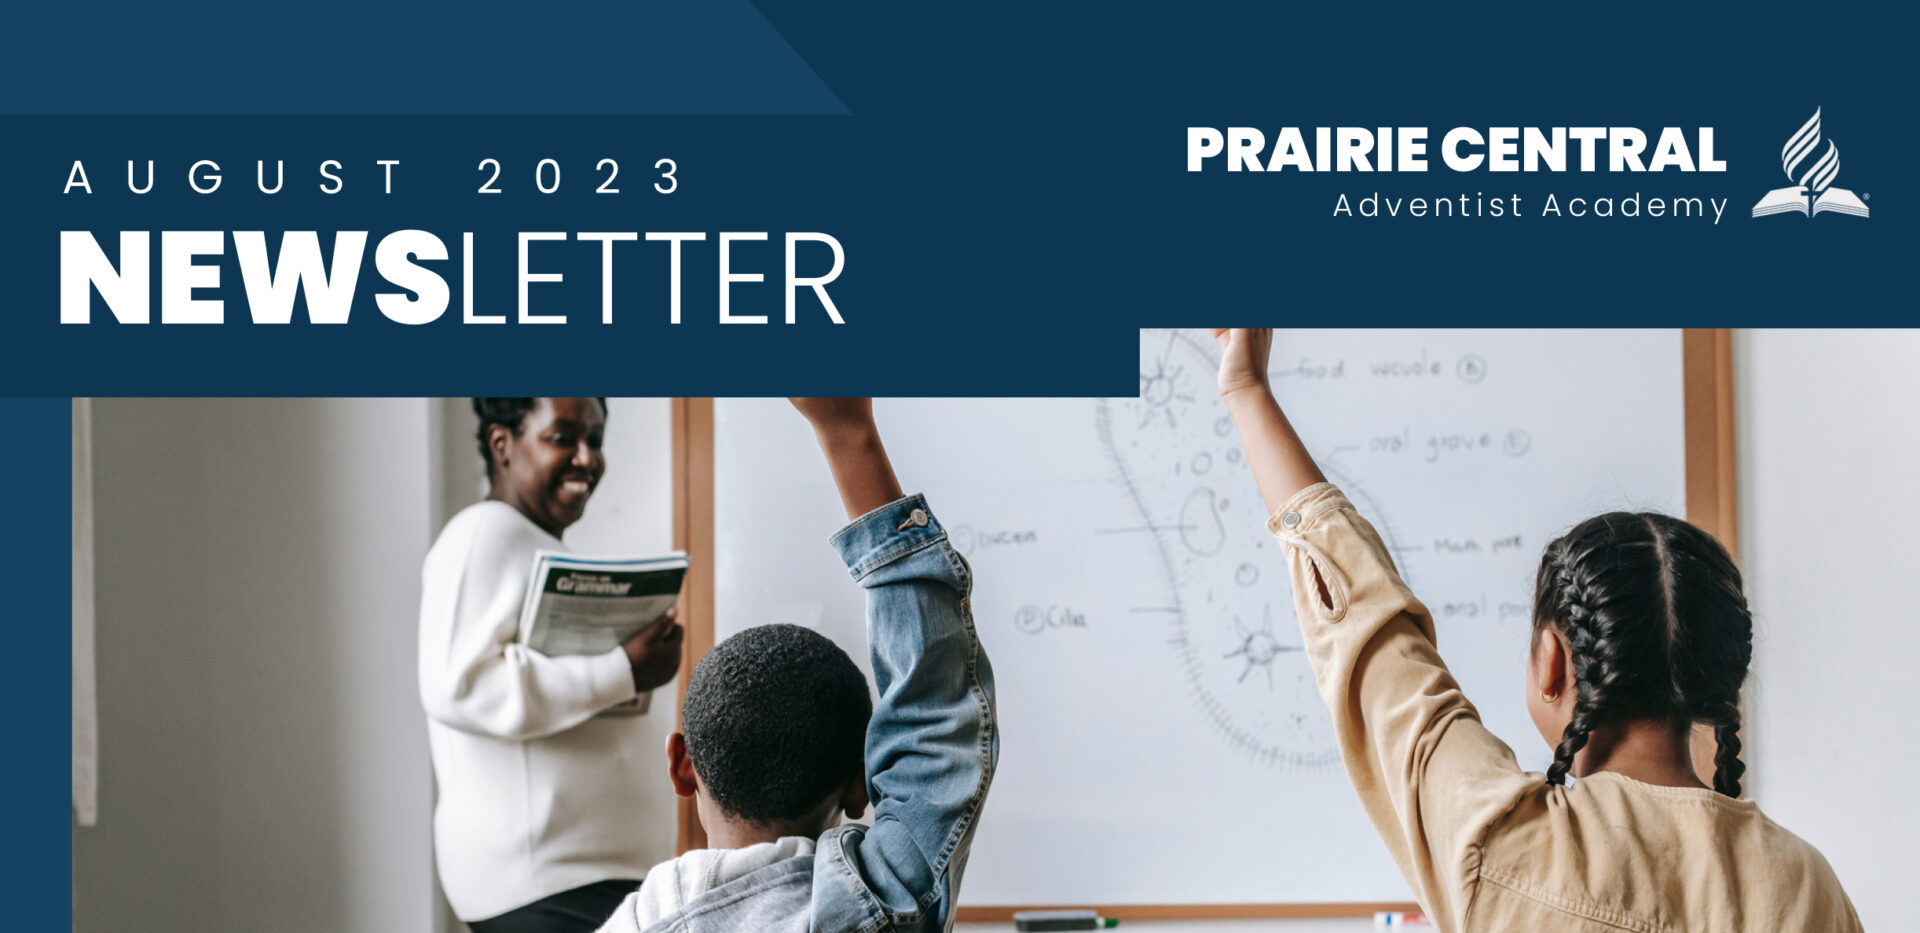 August 2023 PCAA Newsletter - Welcome Back